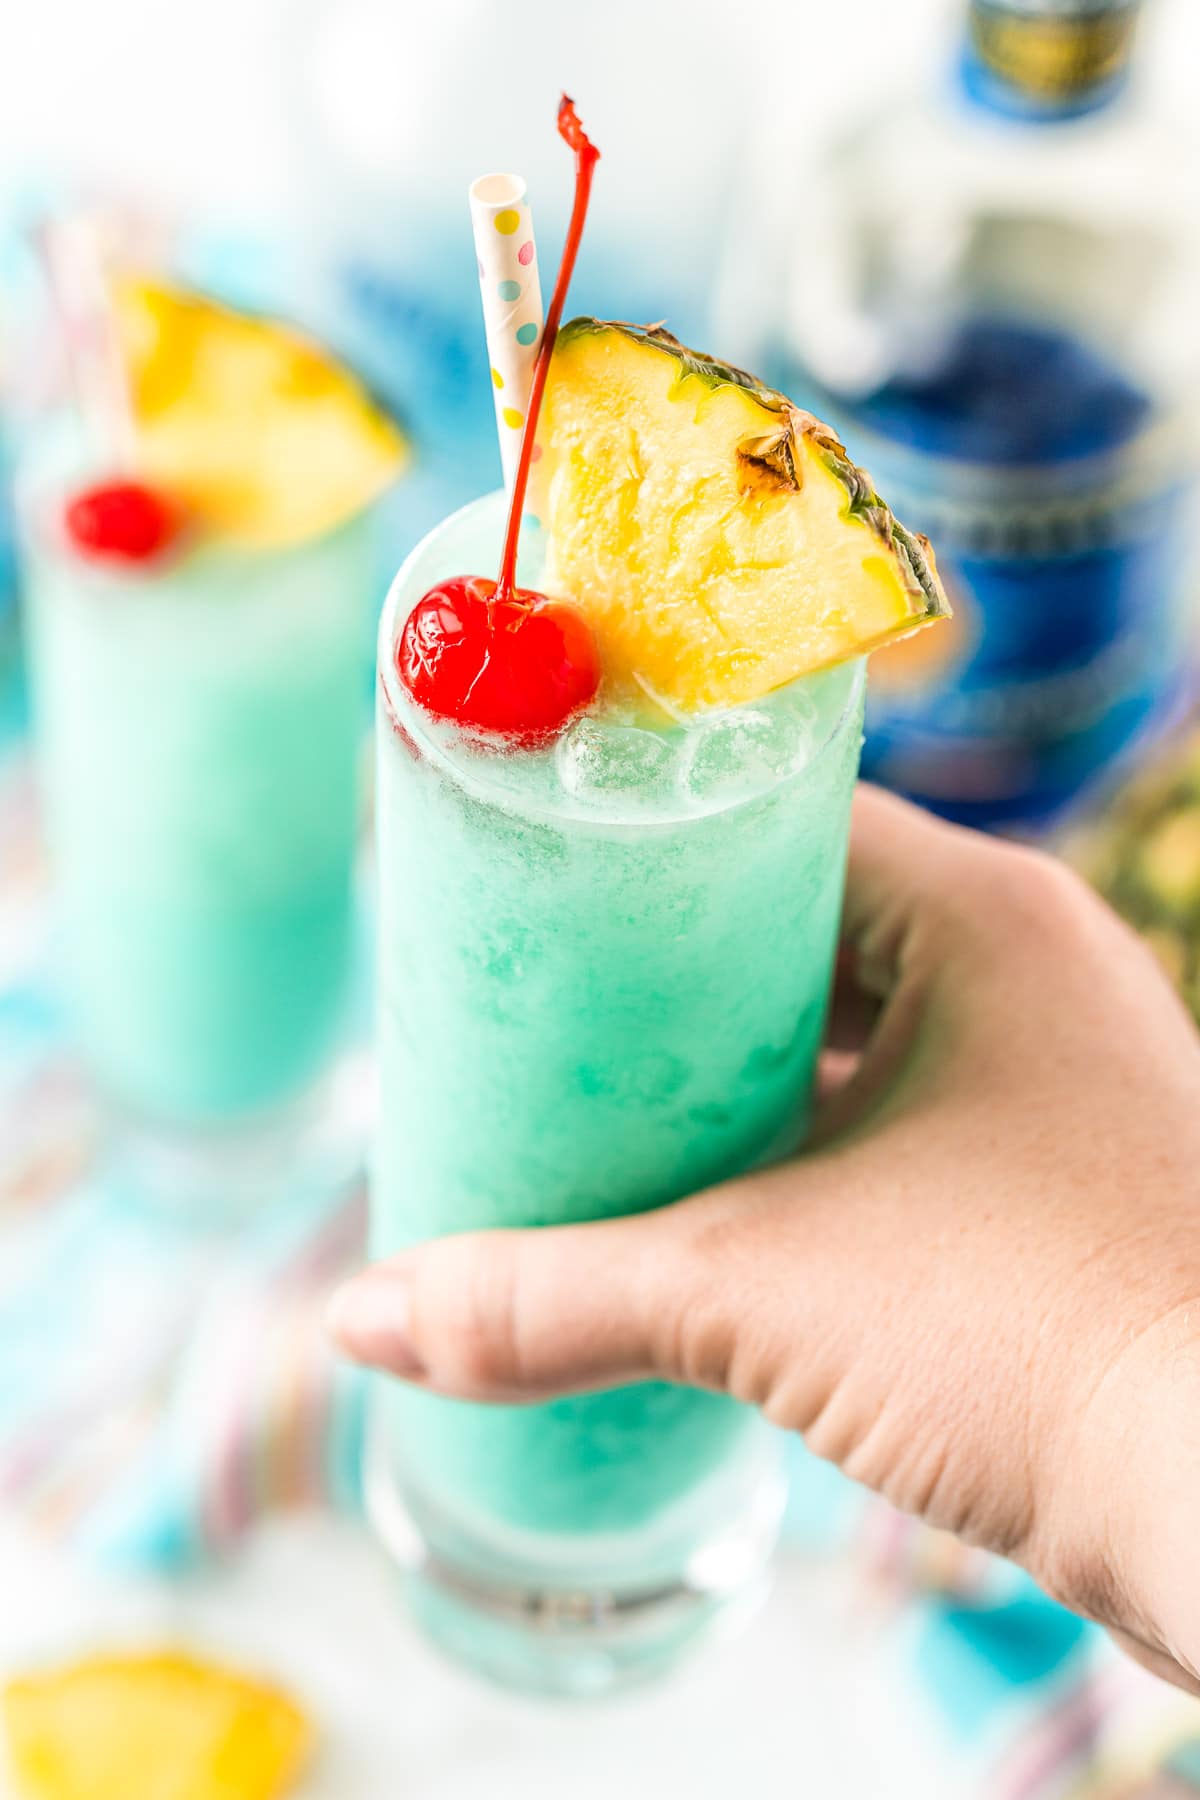 Woman's hand holding a blue hawaiian cocktail garnished with pineapple wedges and a maraschino cherry.